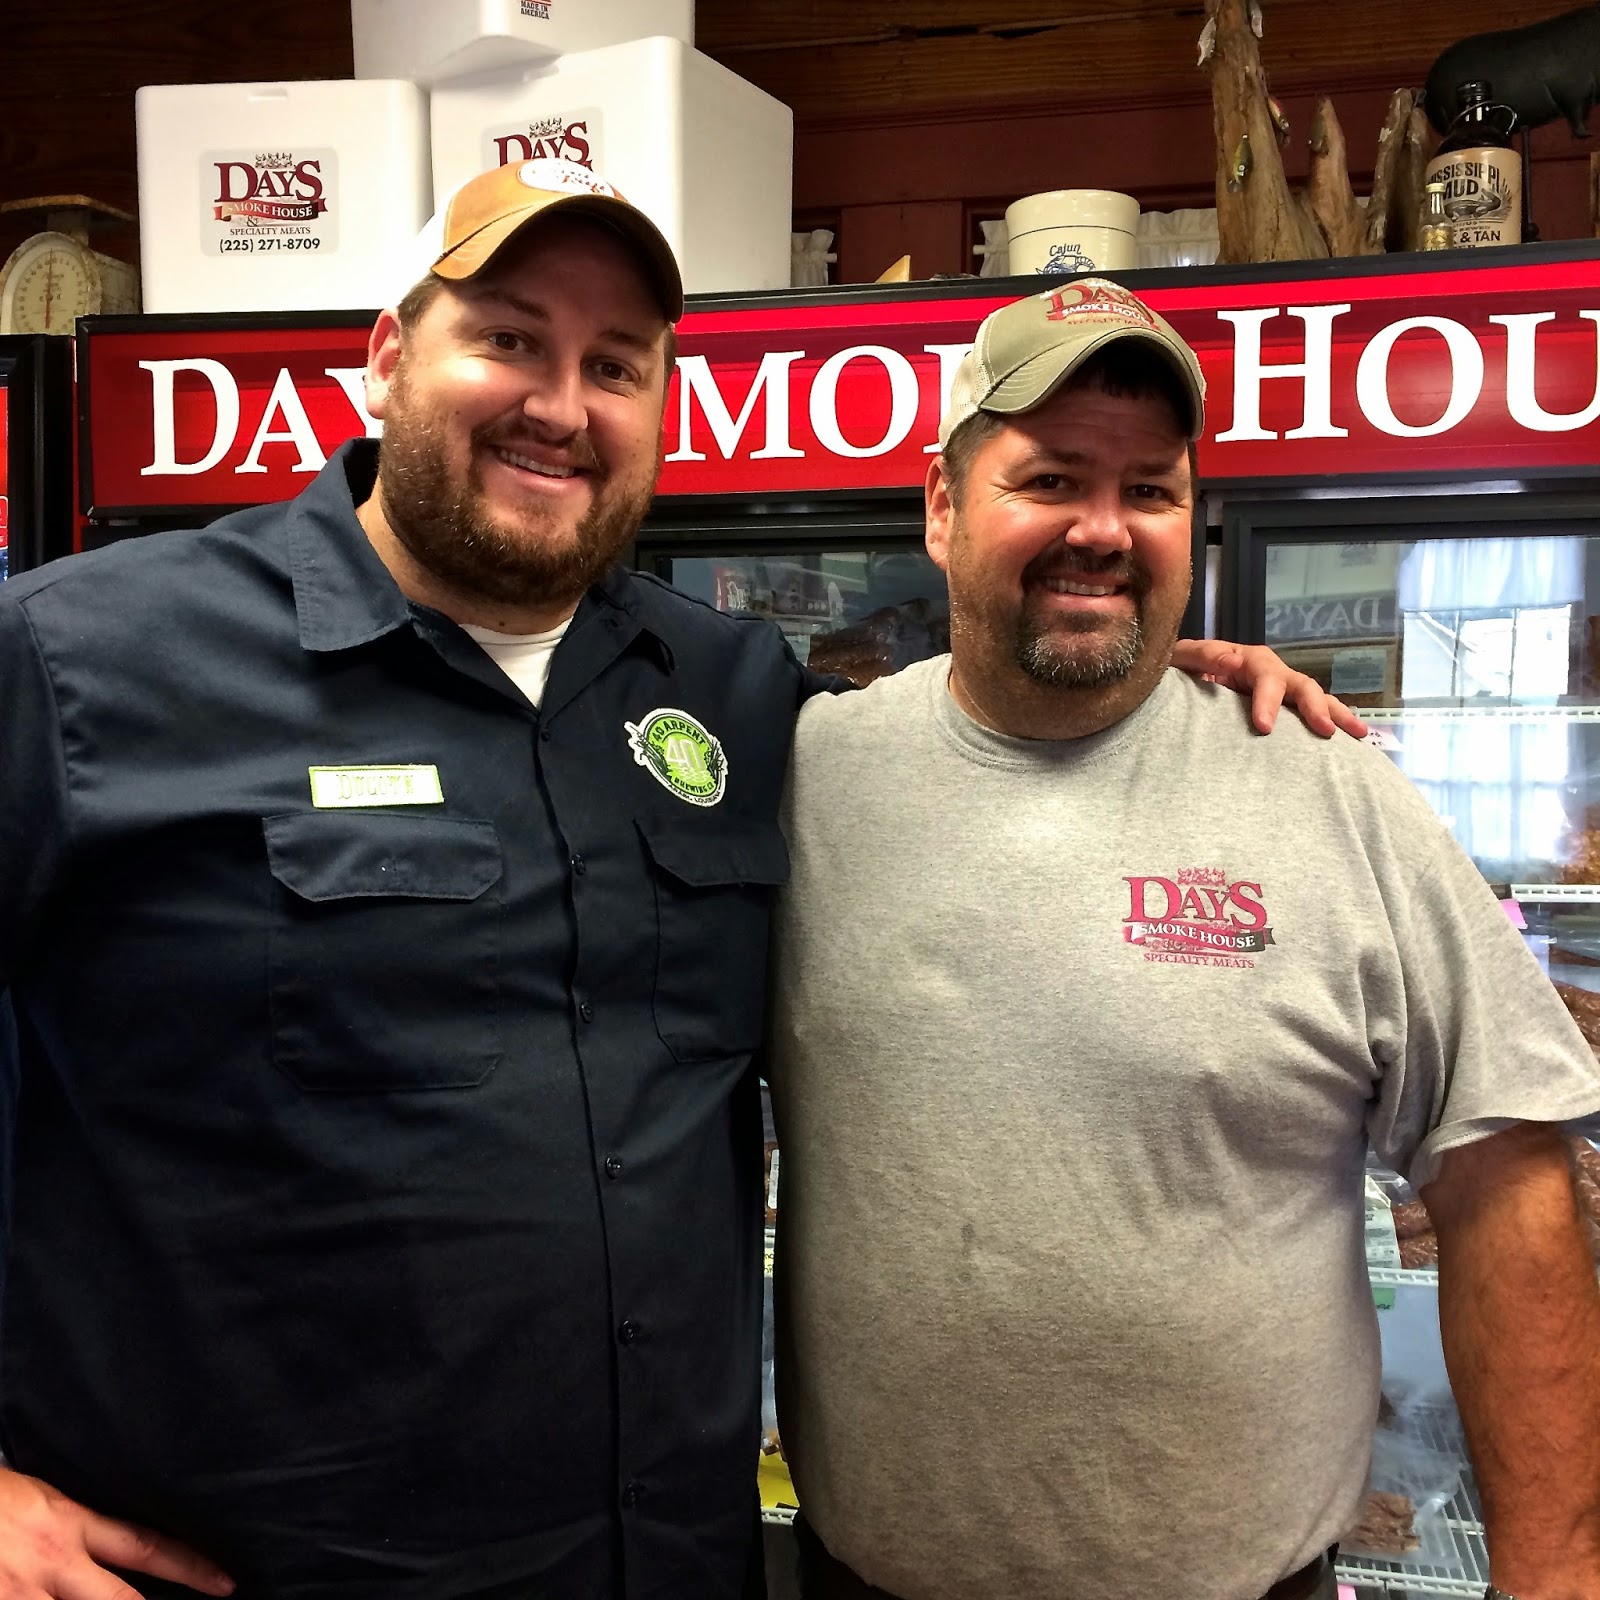 Owner Kendall Day and I at Day's Smokehouse in Denham Springs